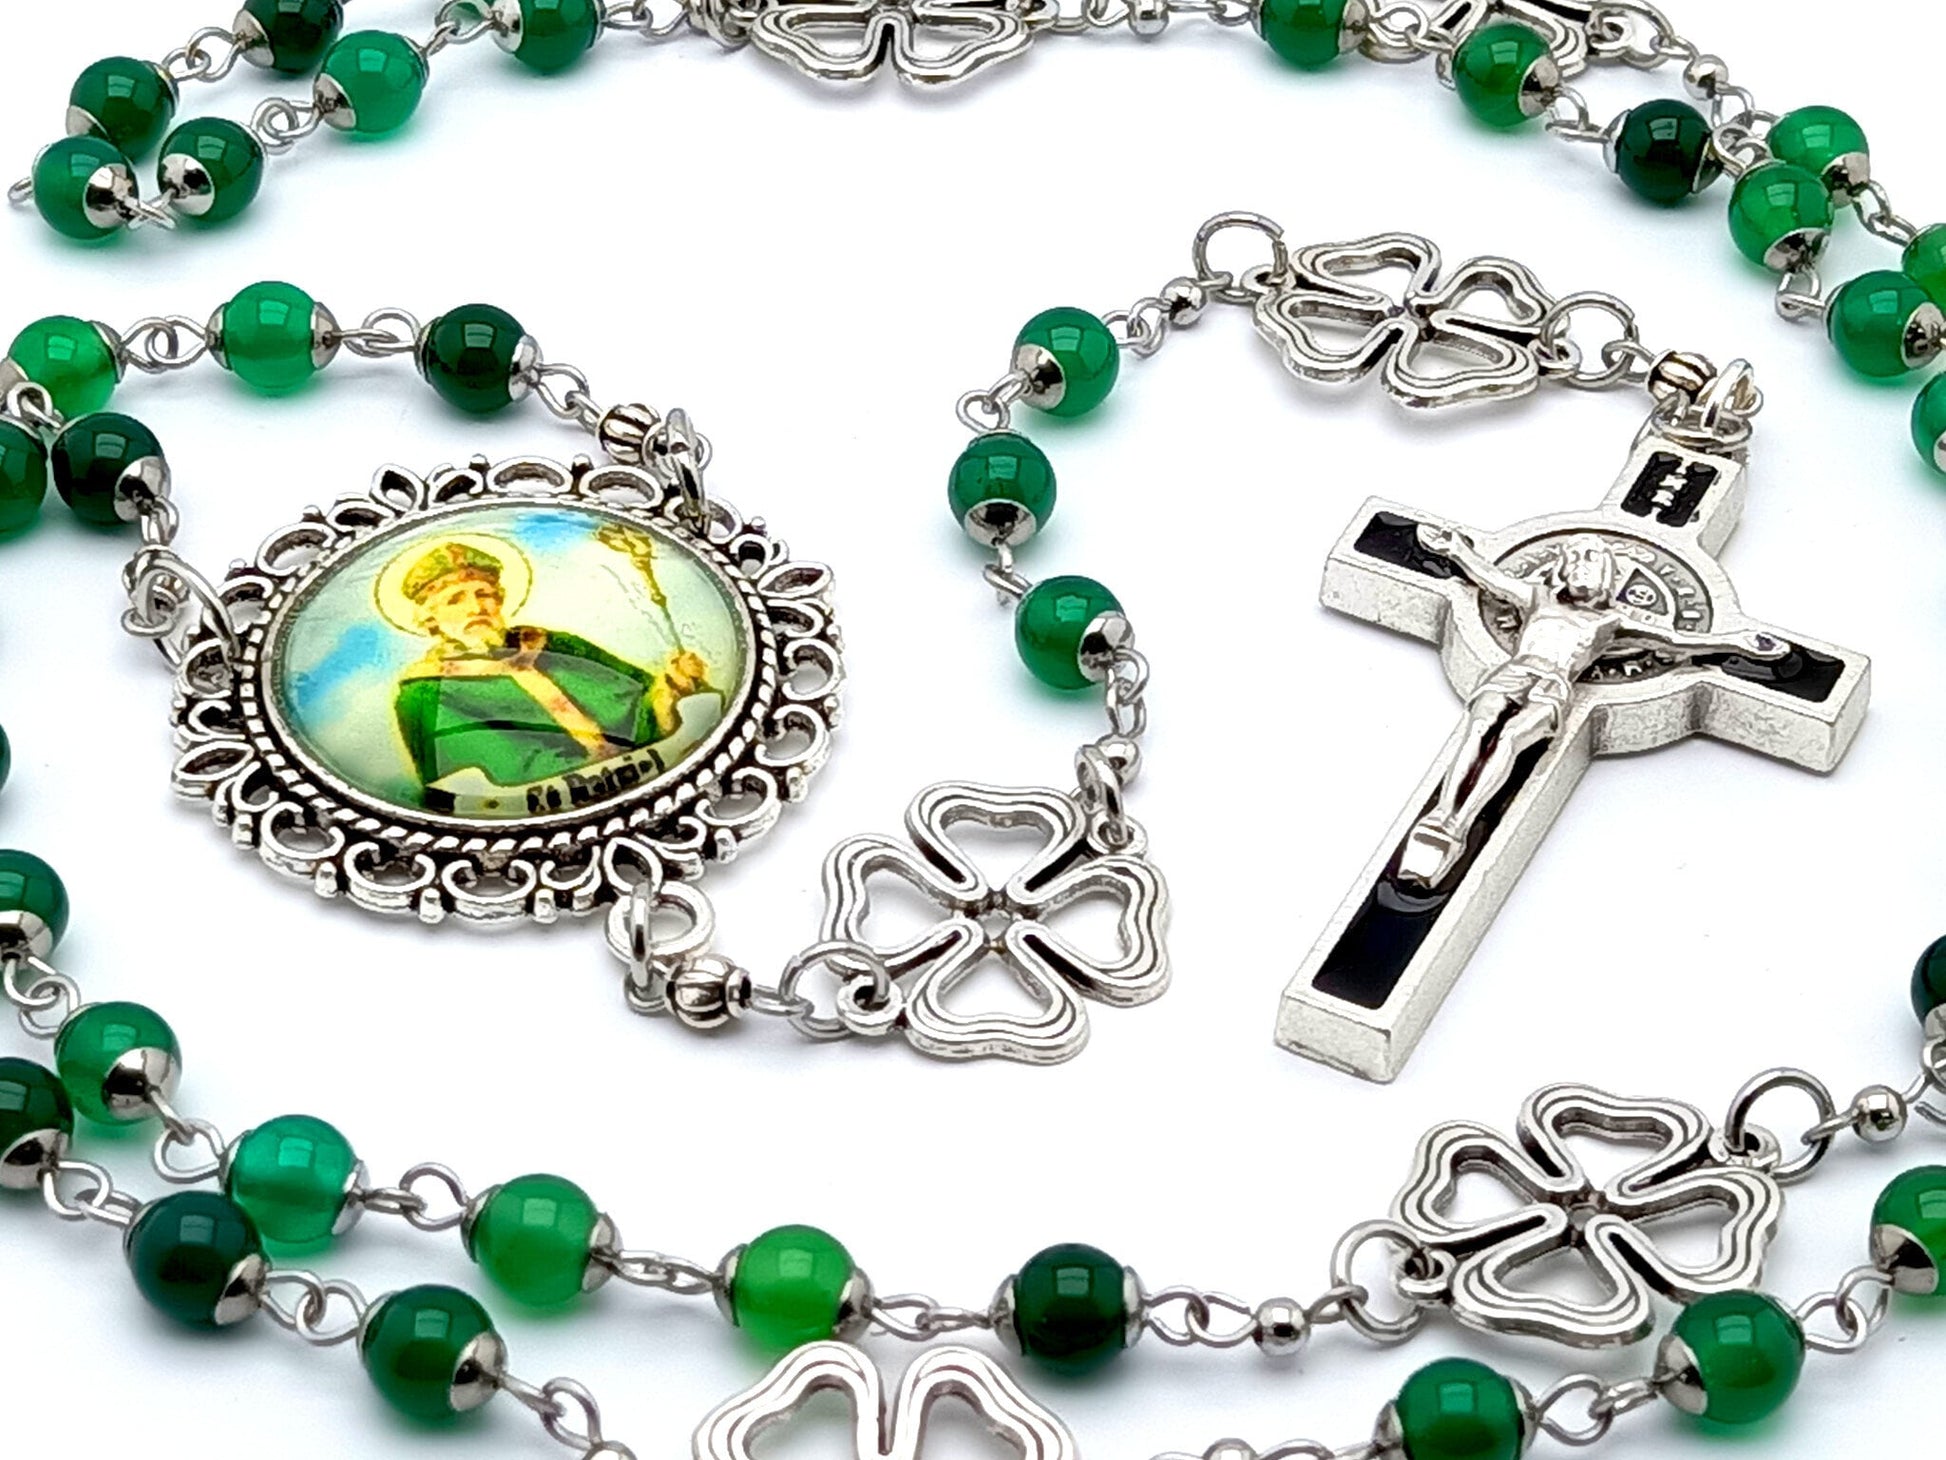 Saint Patrick unique rosary beads with green agate and silver shamrock beads, silver and black enamel crucifix and picture centre medal.